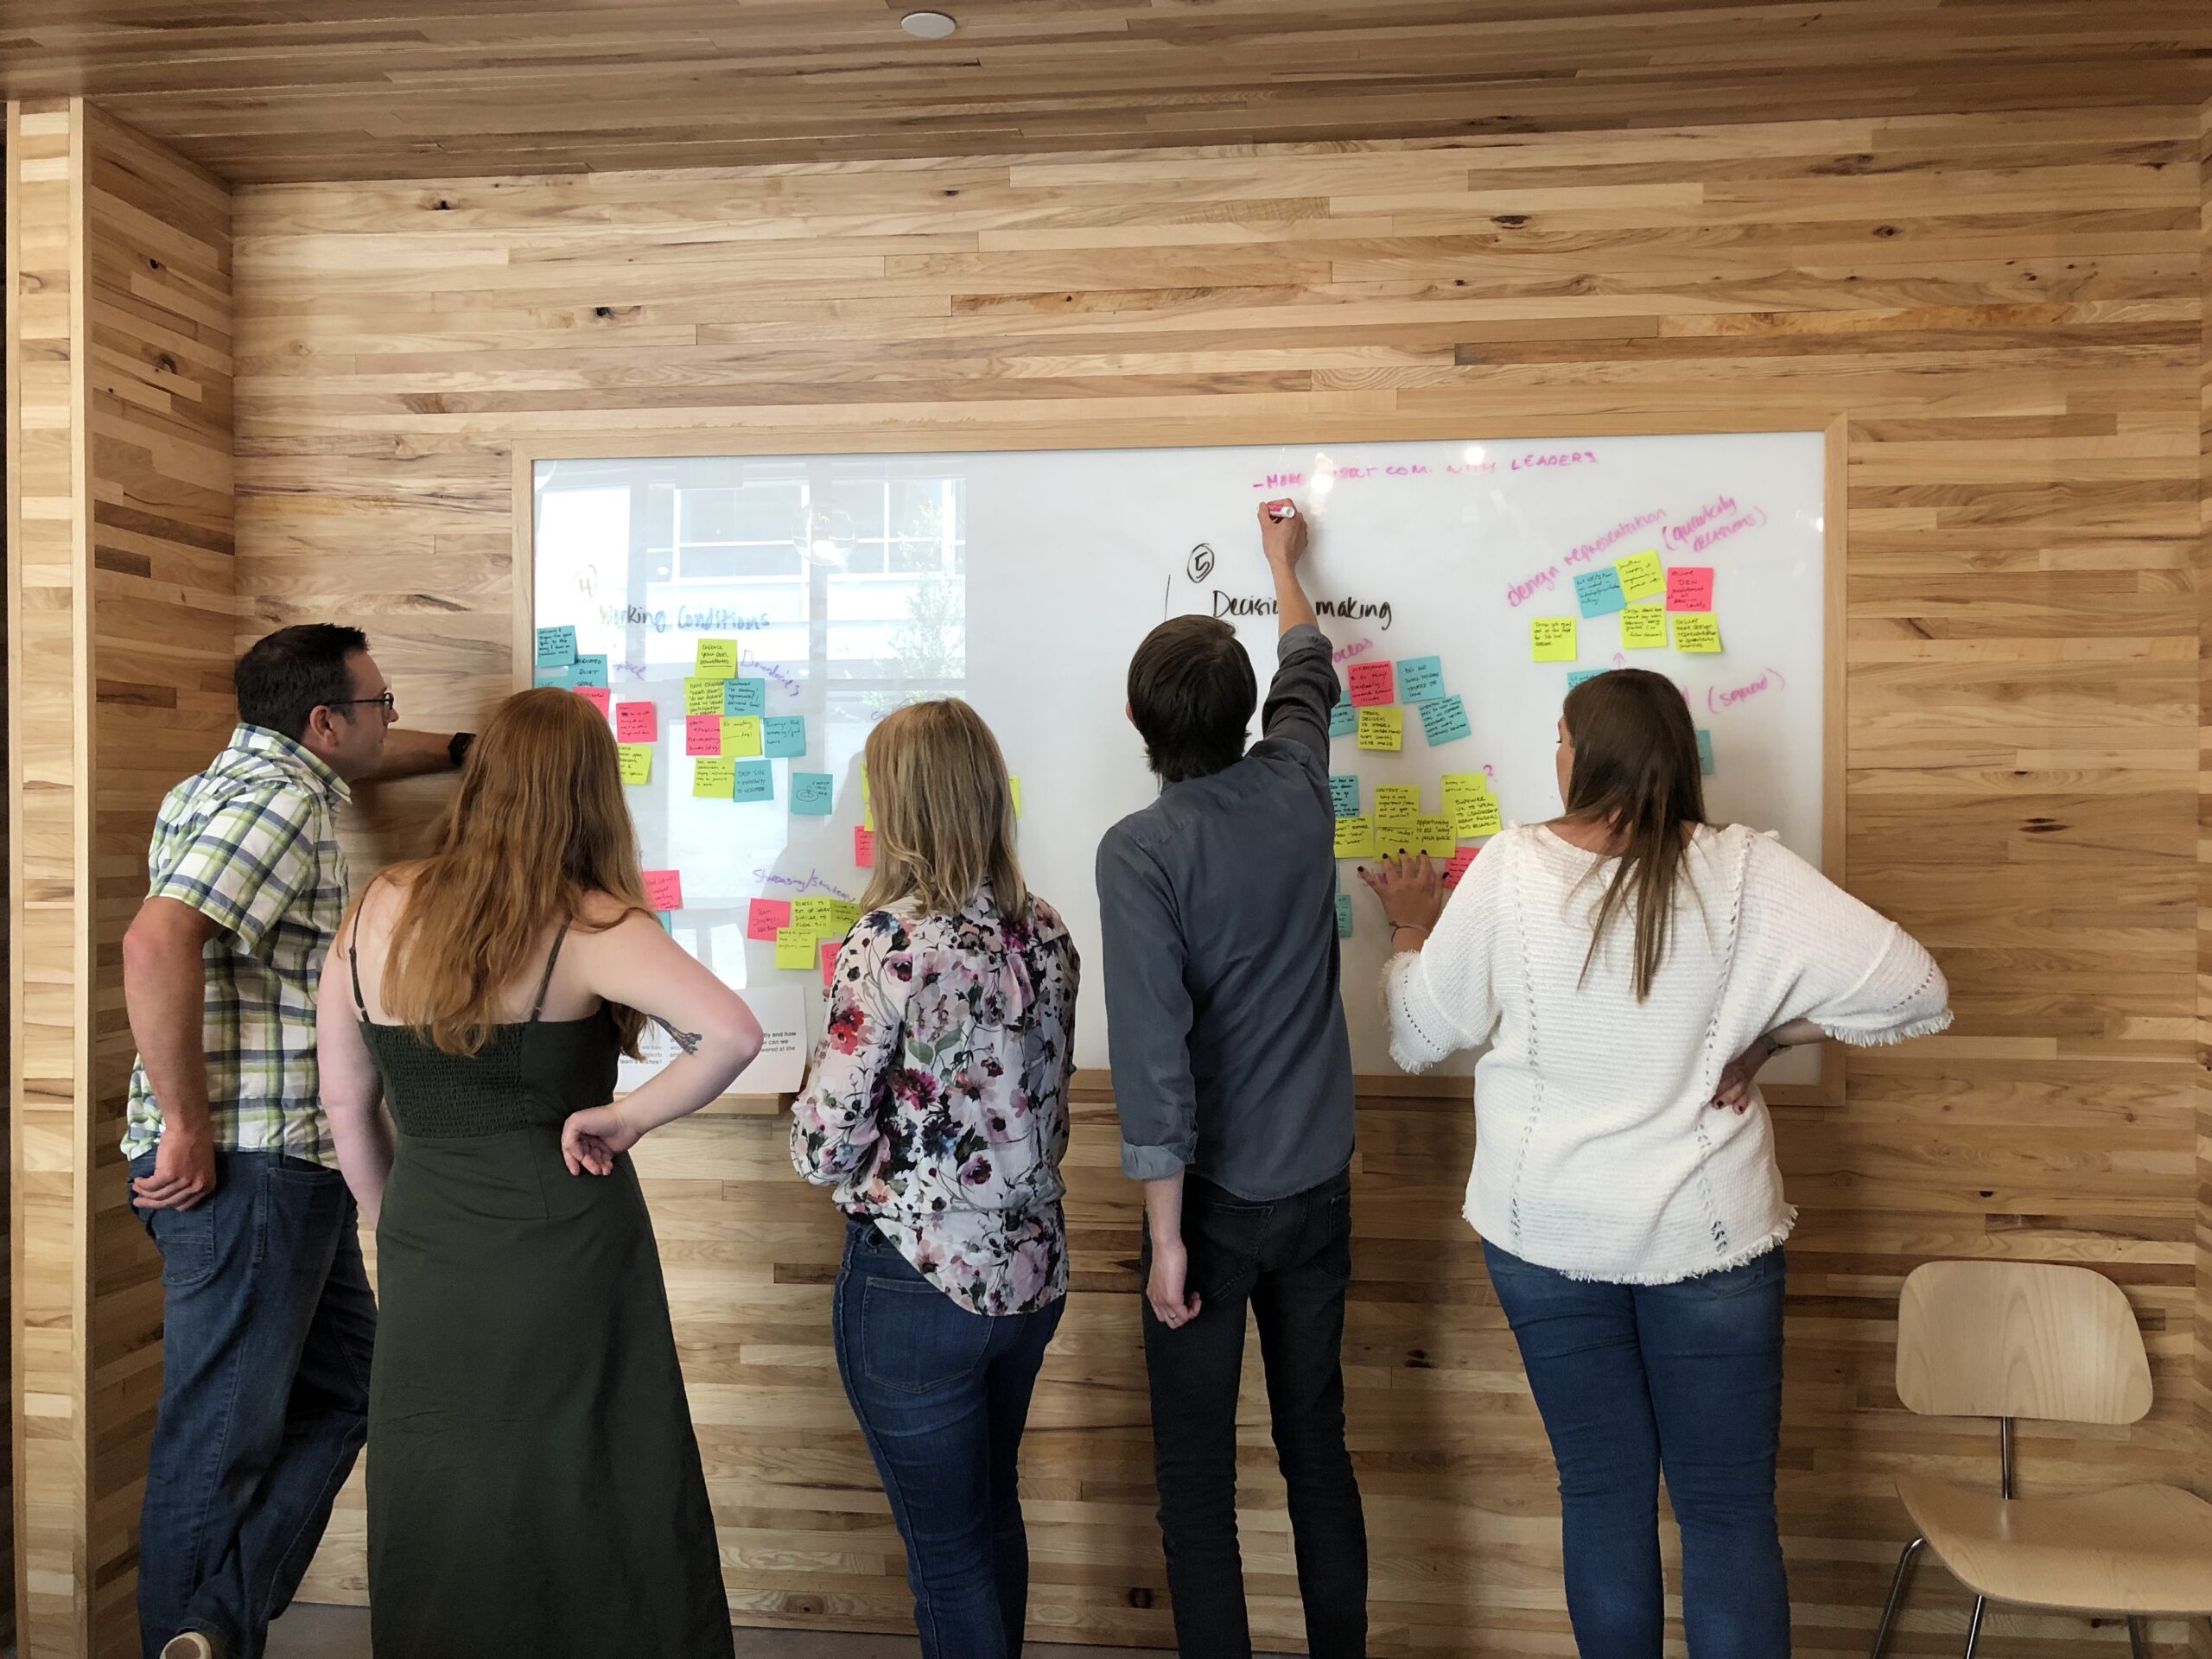 Group of people collaborating in front of a whiteboard